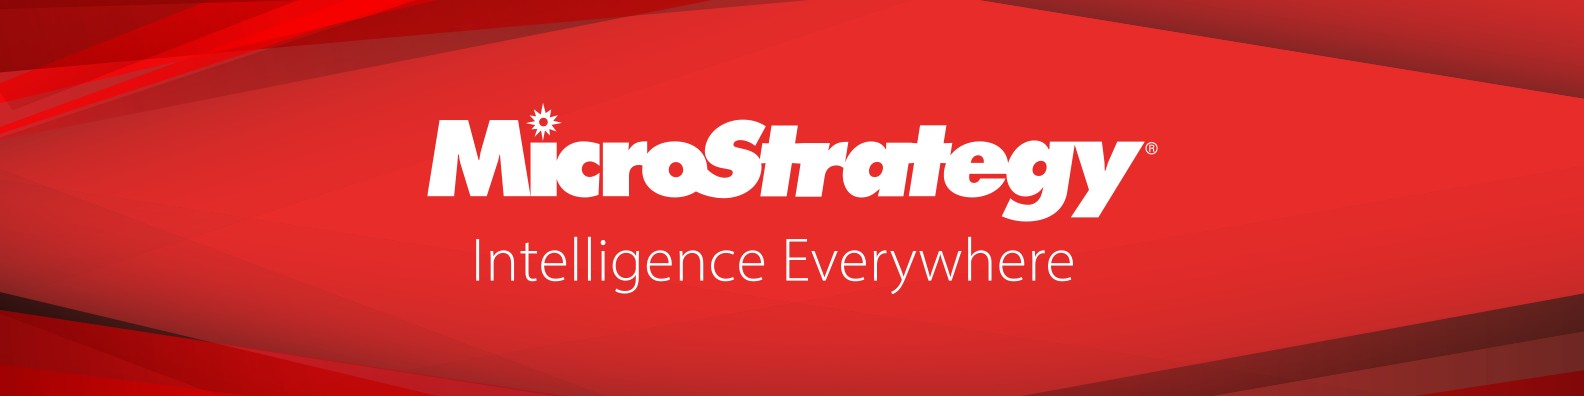 MicroStrategy's business analytics and mobility platform helps enterprises build and deploy analytics and mobility apps to transform their business.